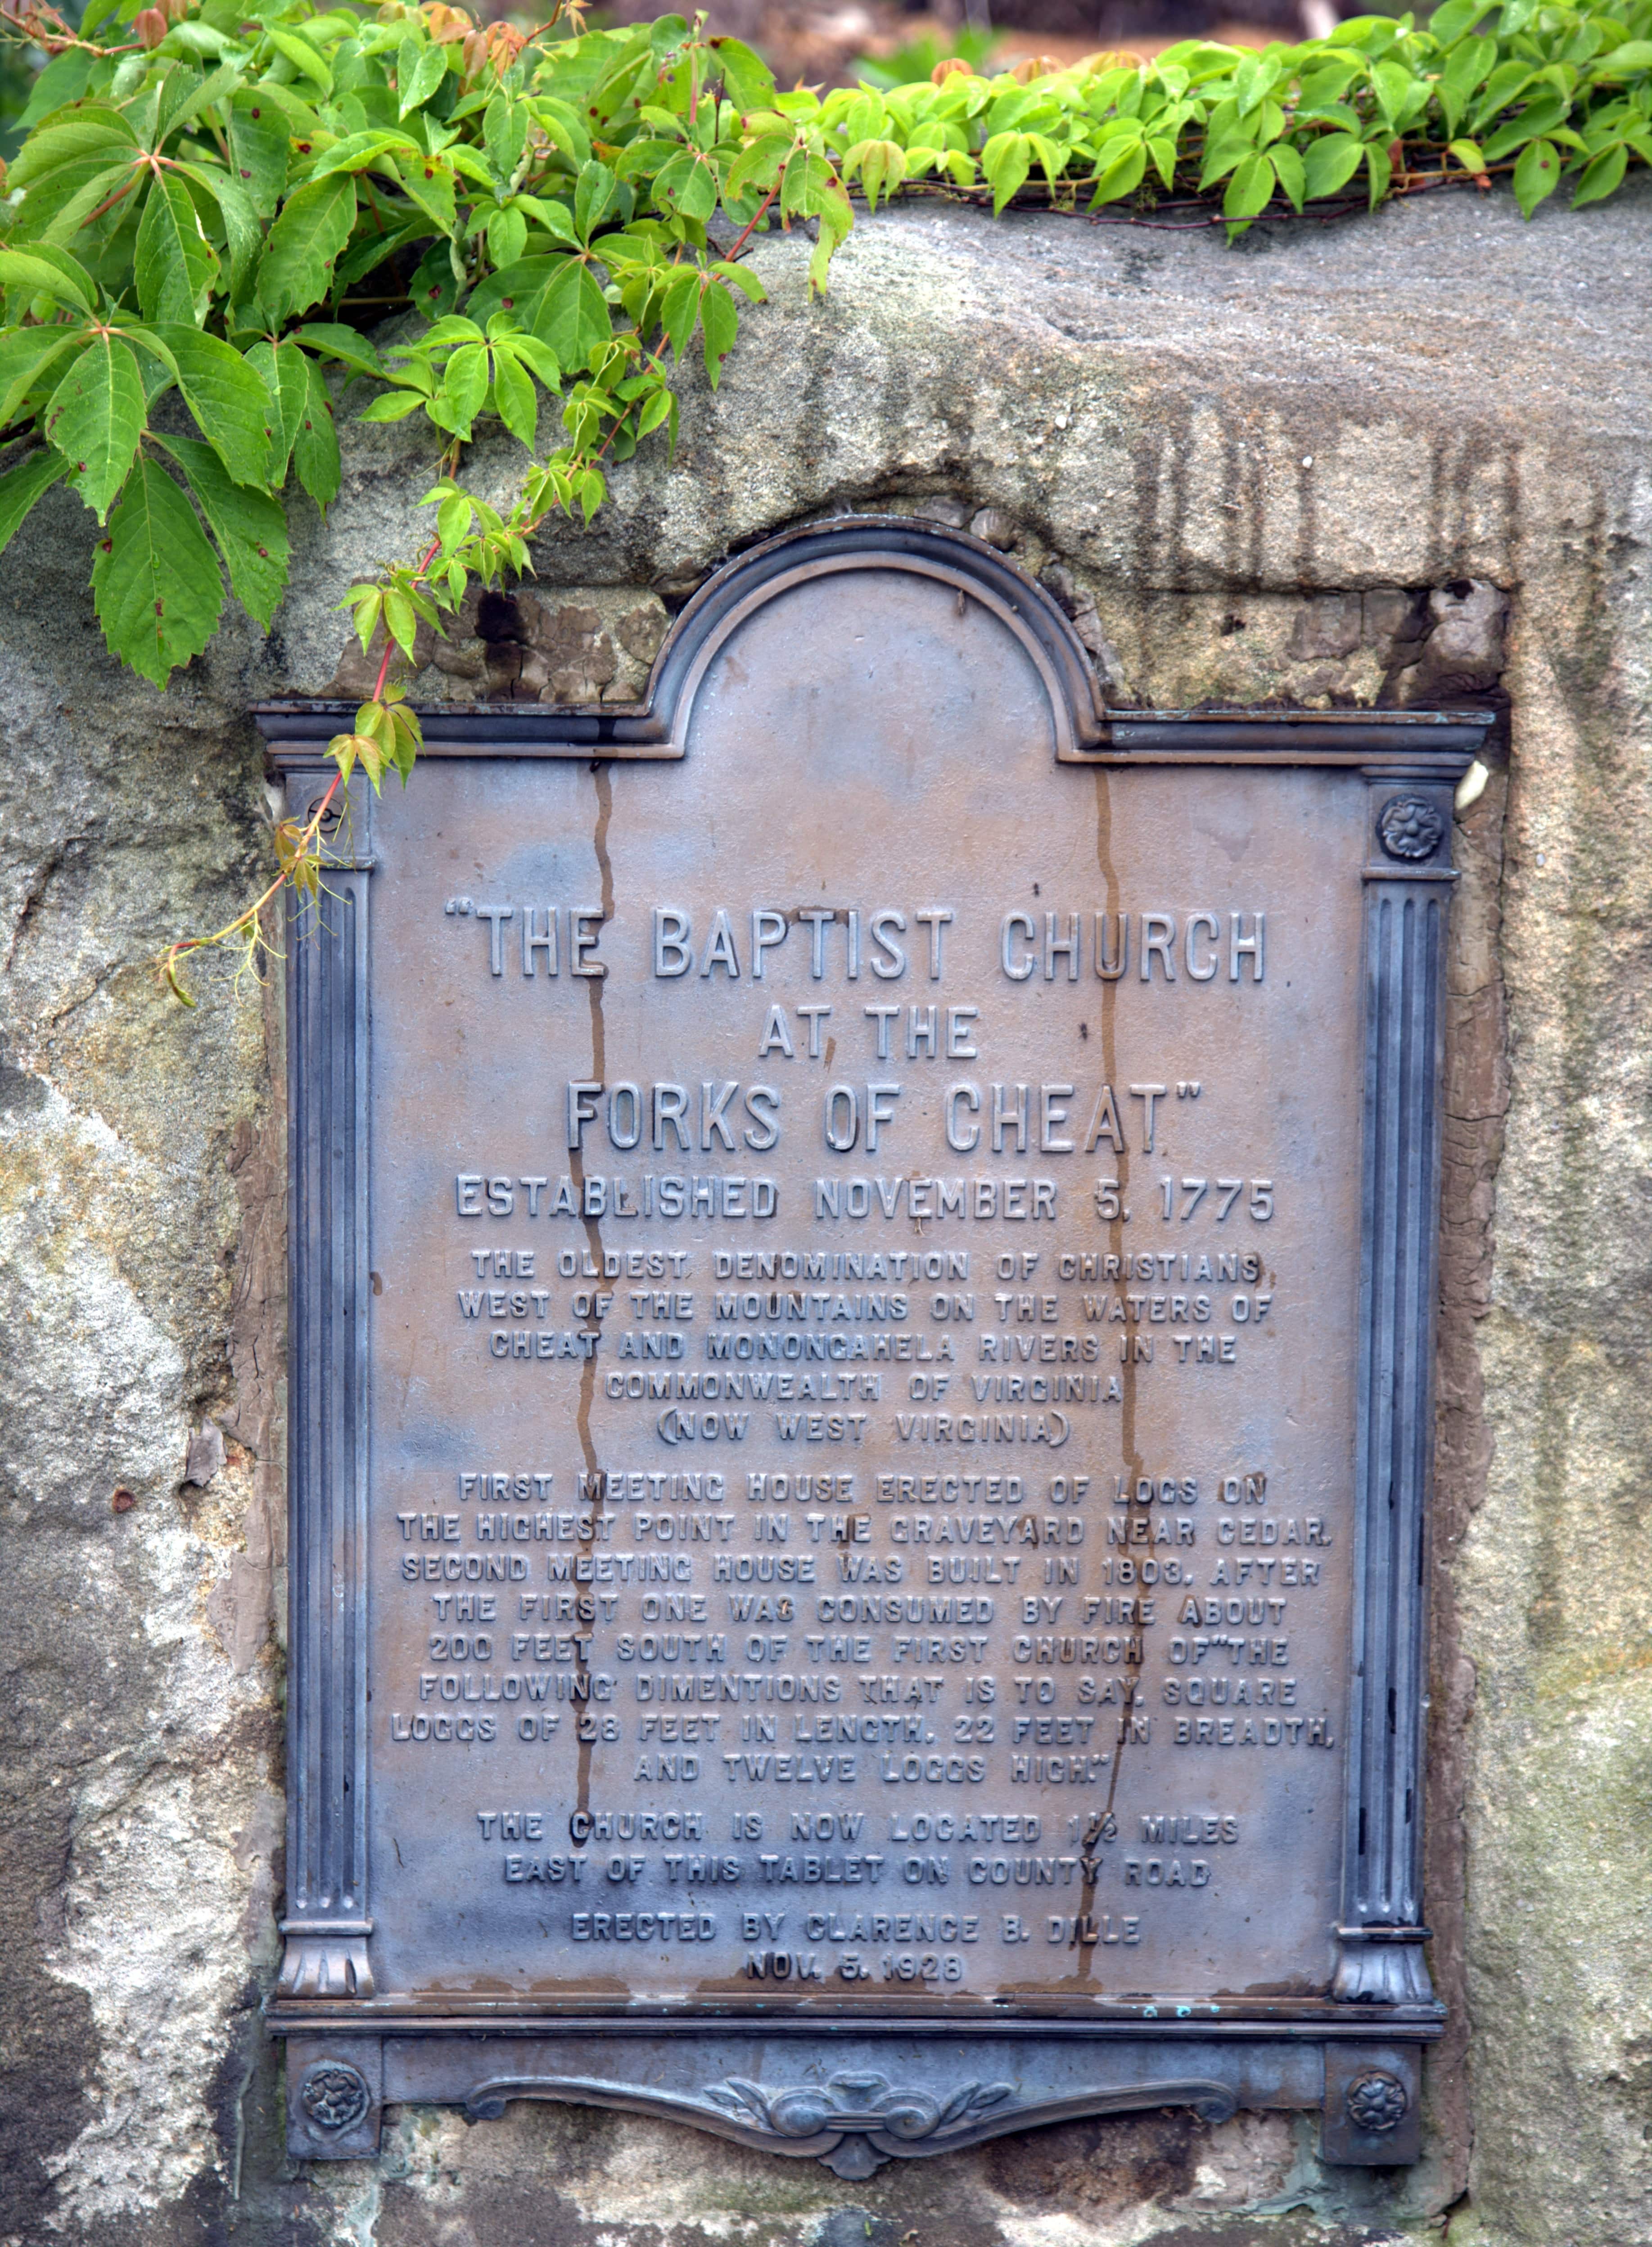 "The Baptist Church at the Forks of Cheat" Plaque